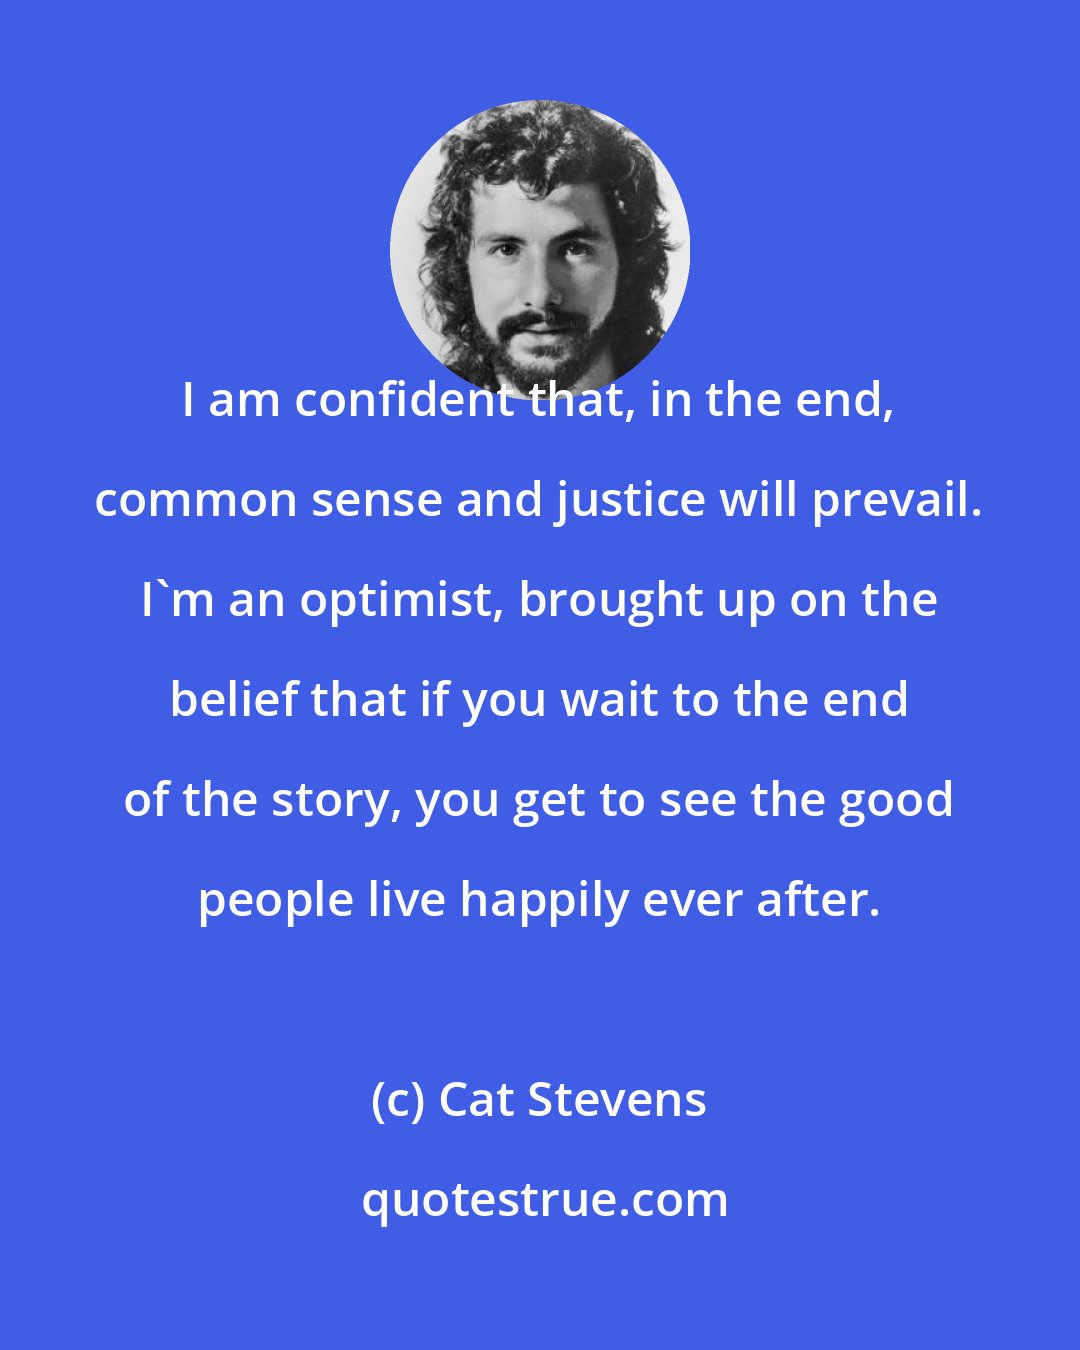 Cat Stevens: I am confident that, in the end, common sense and justice will prevail. I'm an optimist, brought up on the belief that if you wait to the end of the story, you get to see the good people live happily ever after.